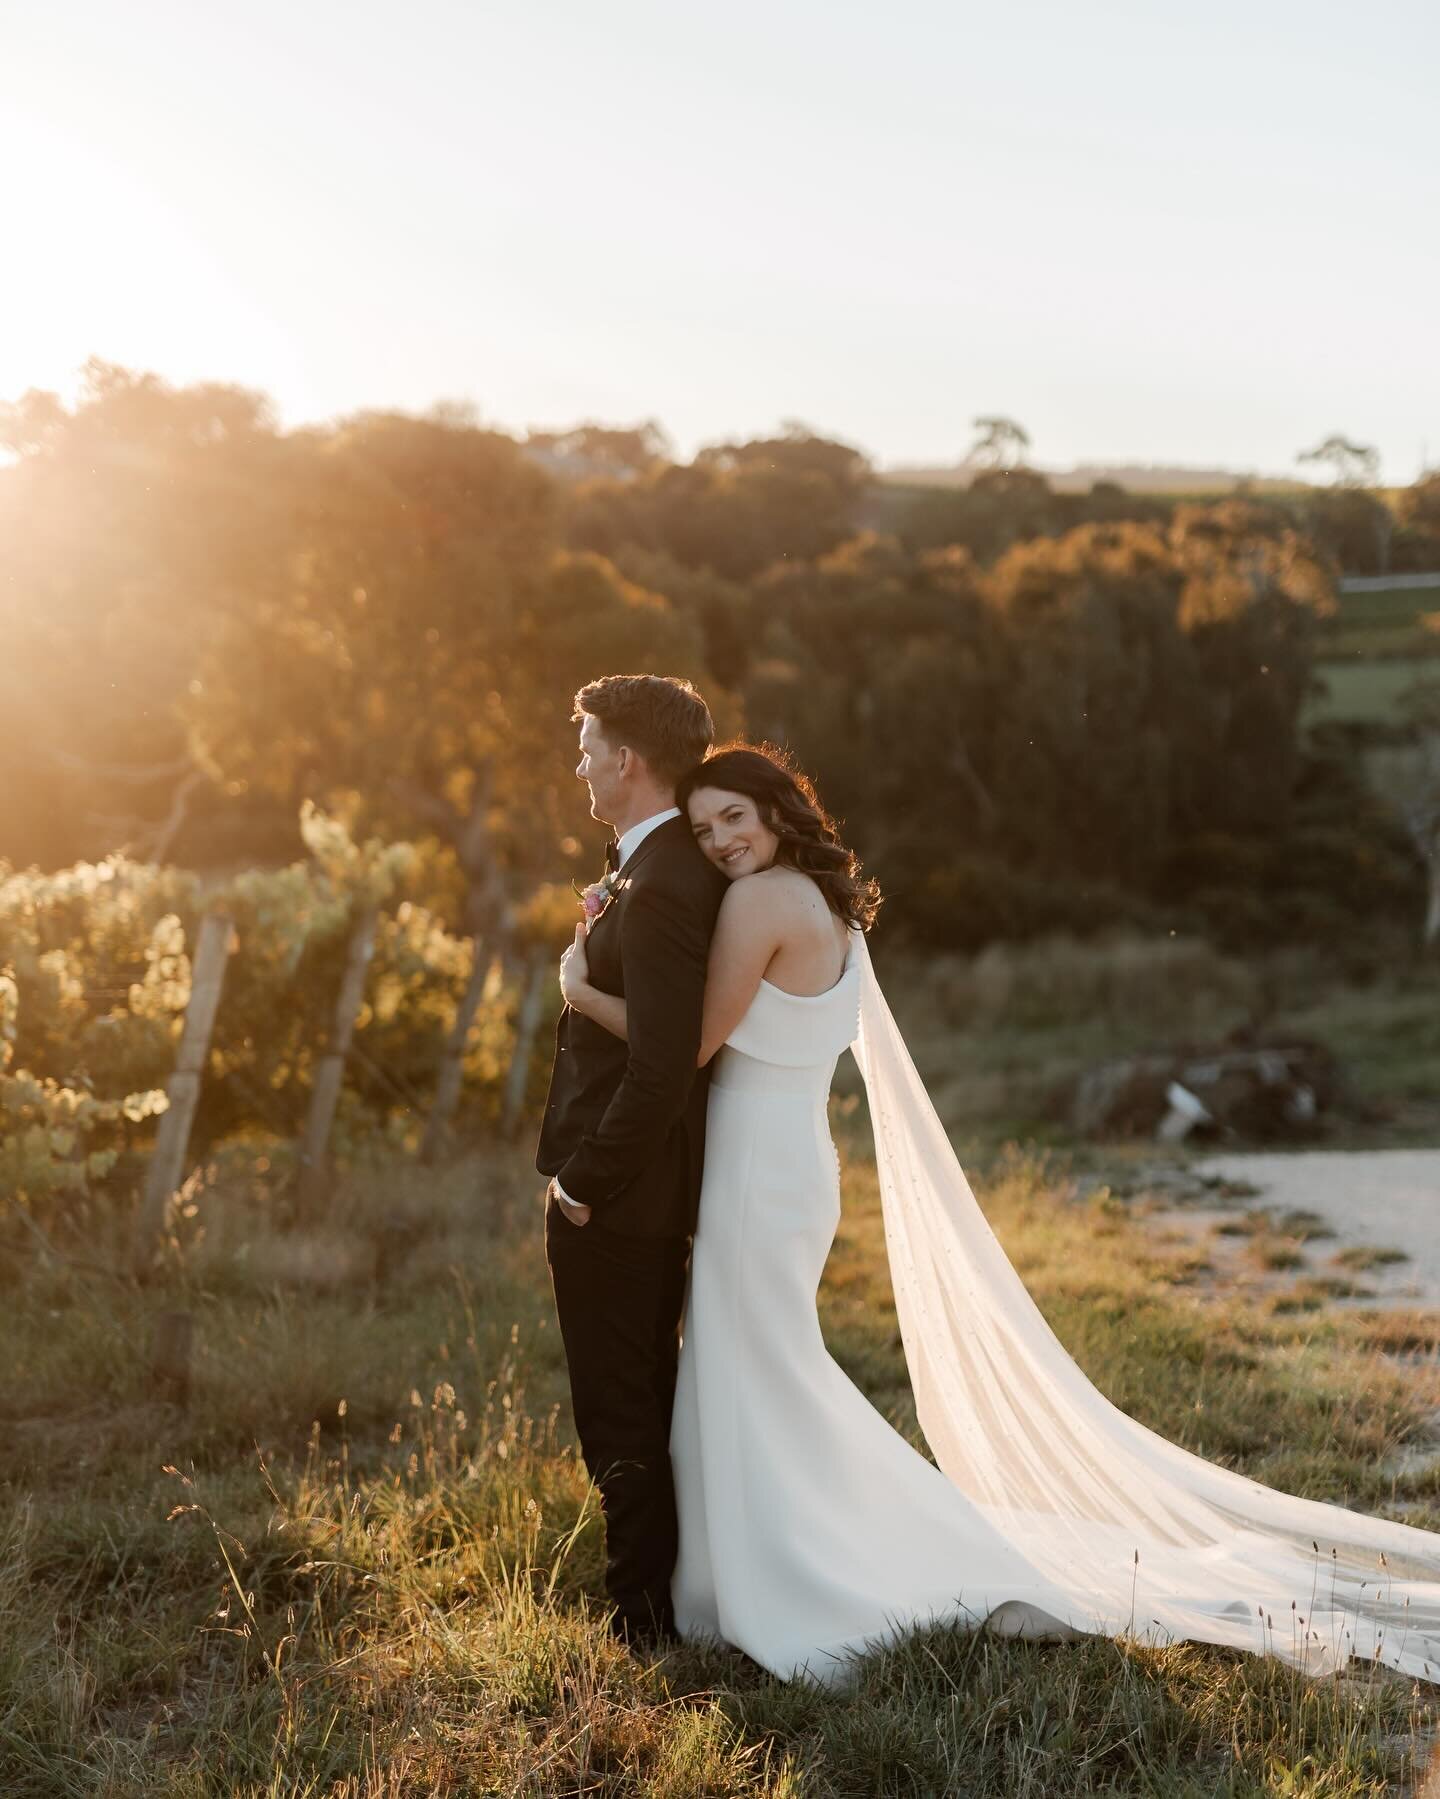 let&rsquo;s talk sunset 👇🏽
/the best light isn&rsquo;t always at &ldquo;sunset&rdquo; / depending on the location, cloud cover, tree lines, if your venue is in a valley etc, sometimes golden light can occur 30 minutes before sunset time; we&rsquo;l